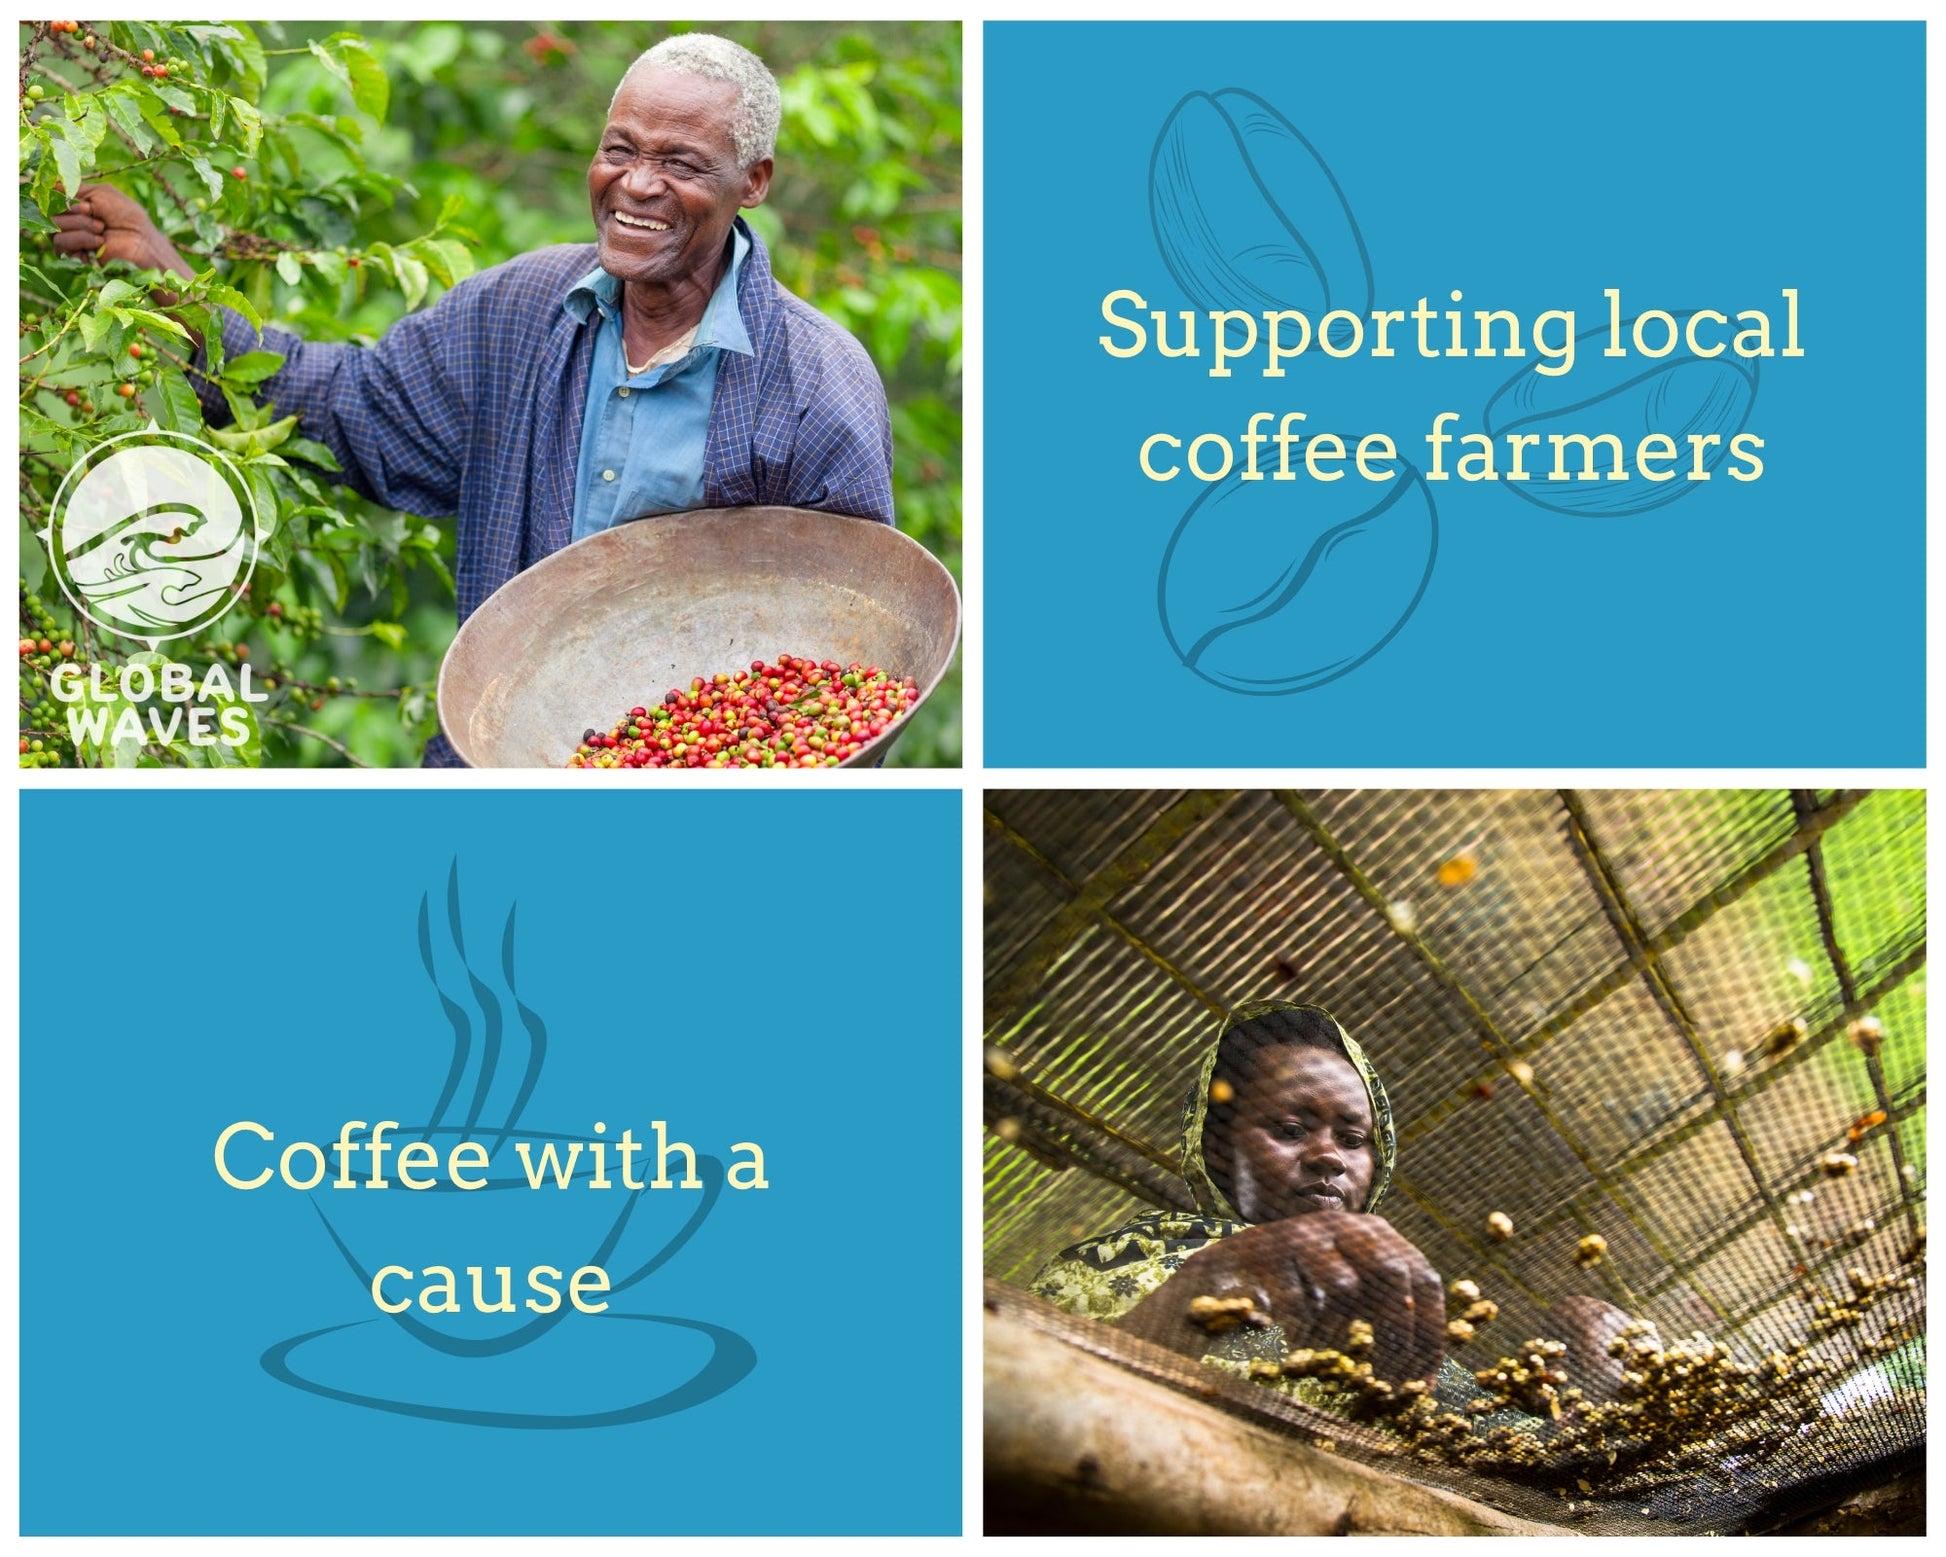 The Global Waves Ethiopia Guji label supports small local farms in the Guji Zone of Ethiopia. We're proud to support these impressive farmers, as well as their families and communities.